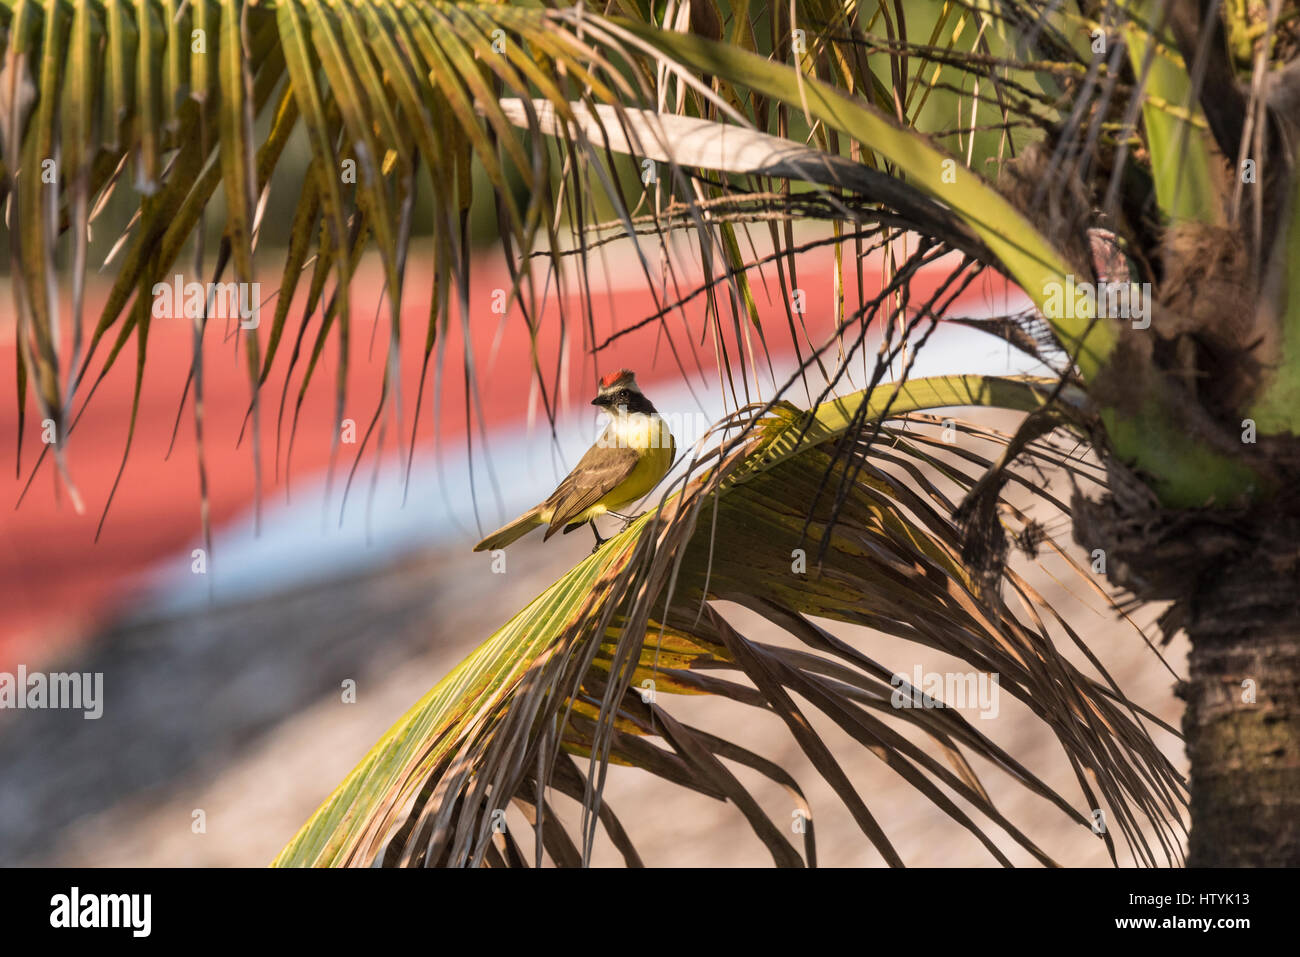 A red-headed Social Flycatcher (Myiozetetes similis) perched in a palm tree in Palenque, Mexico Stock Photo